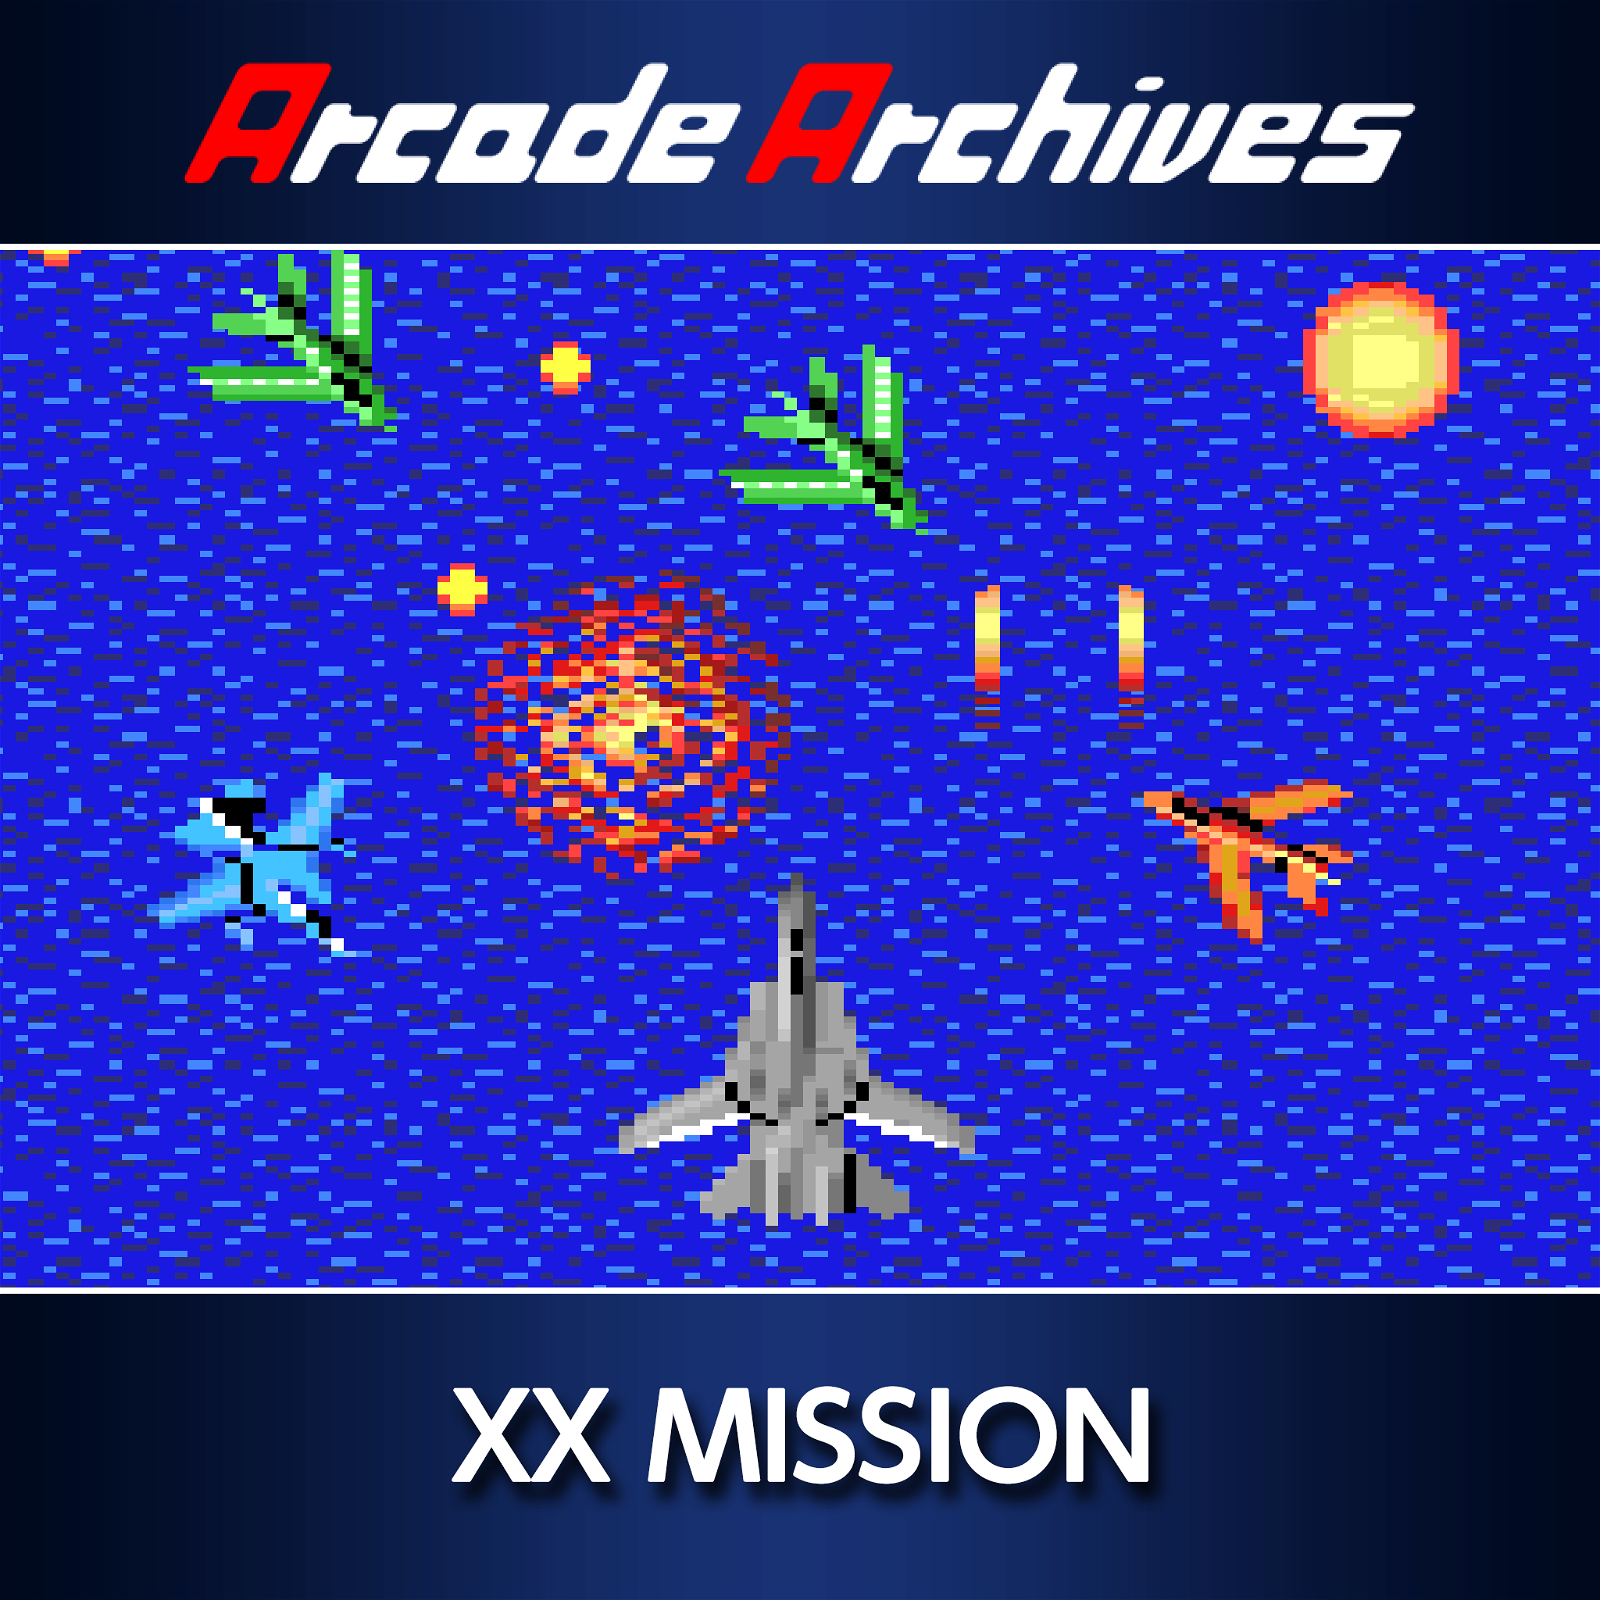 Image of Arcade Archives XX MISSION